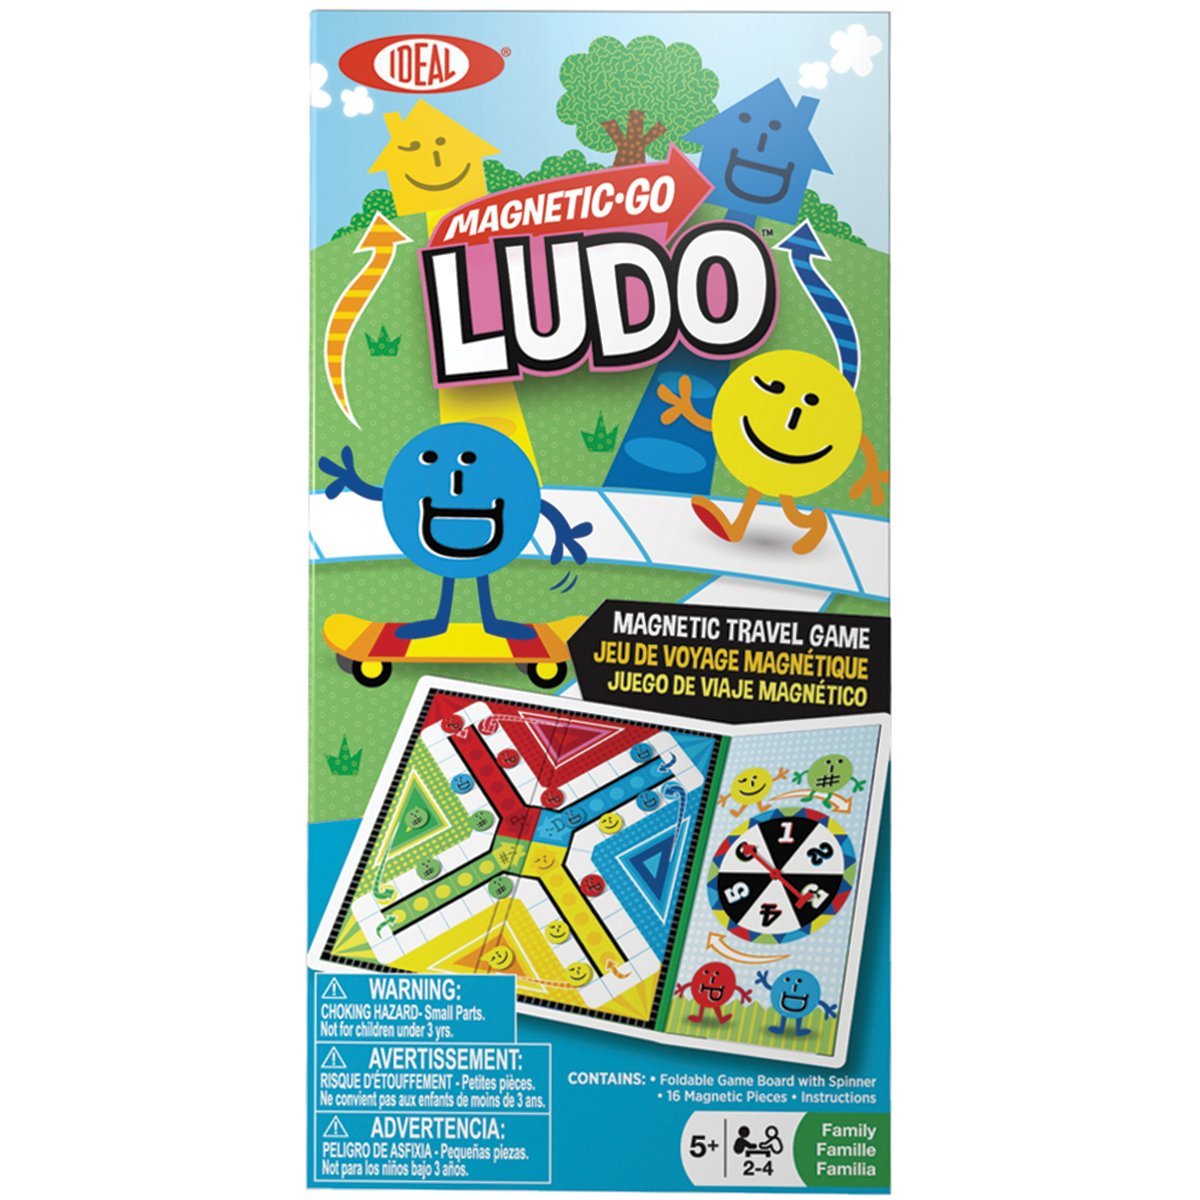 832509tl Ideal Magnetic Go Ludo Travel Game